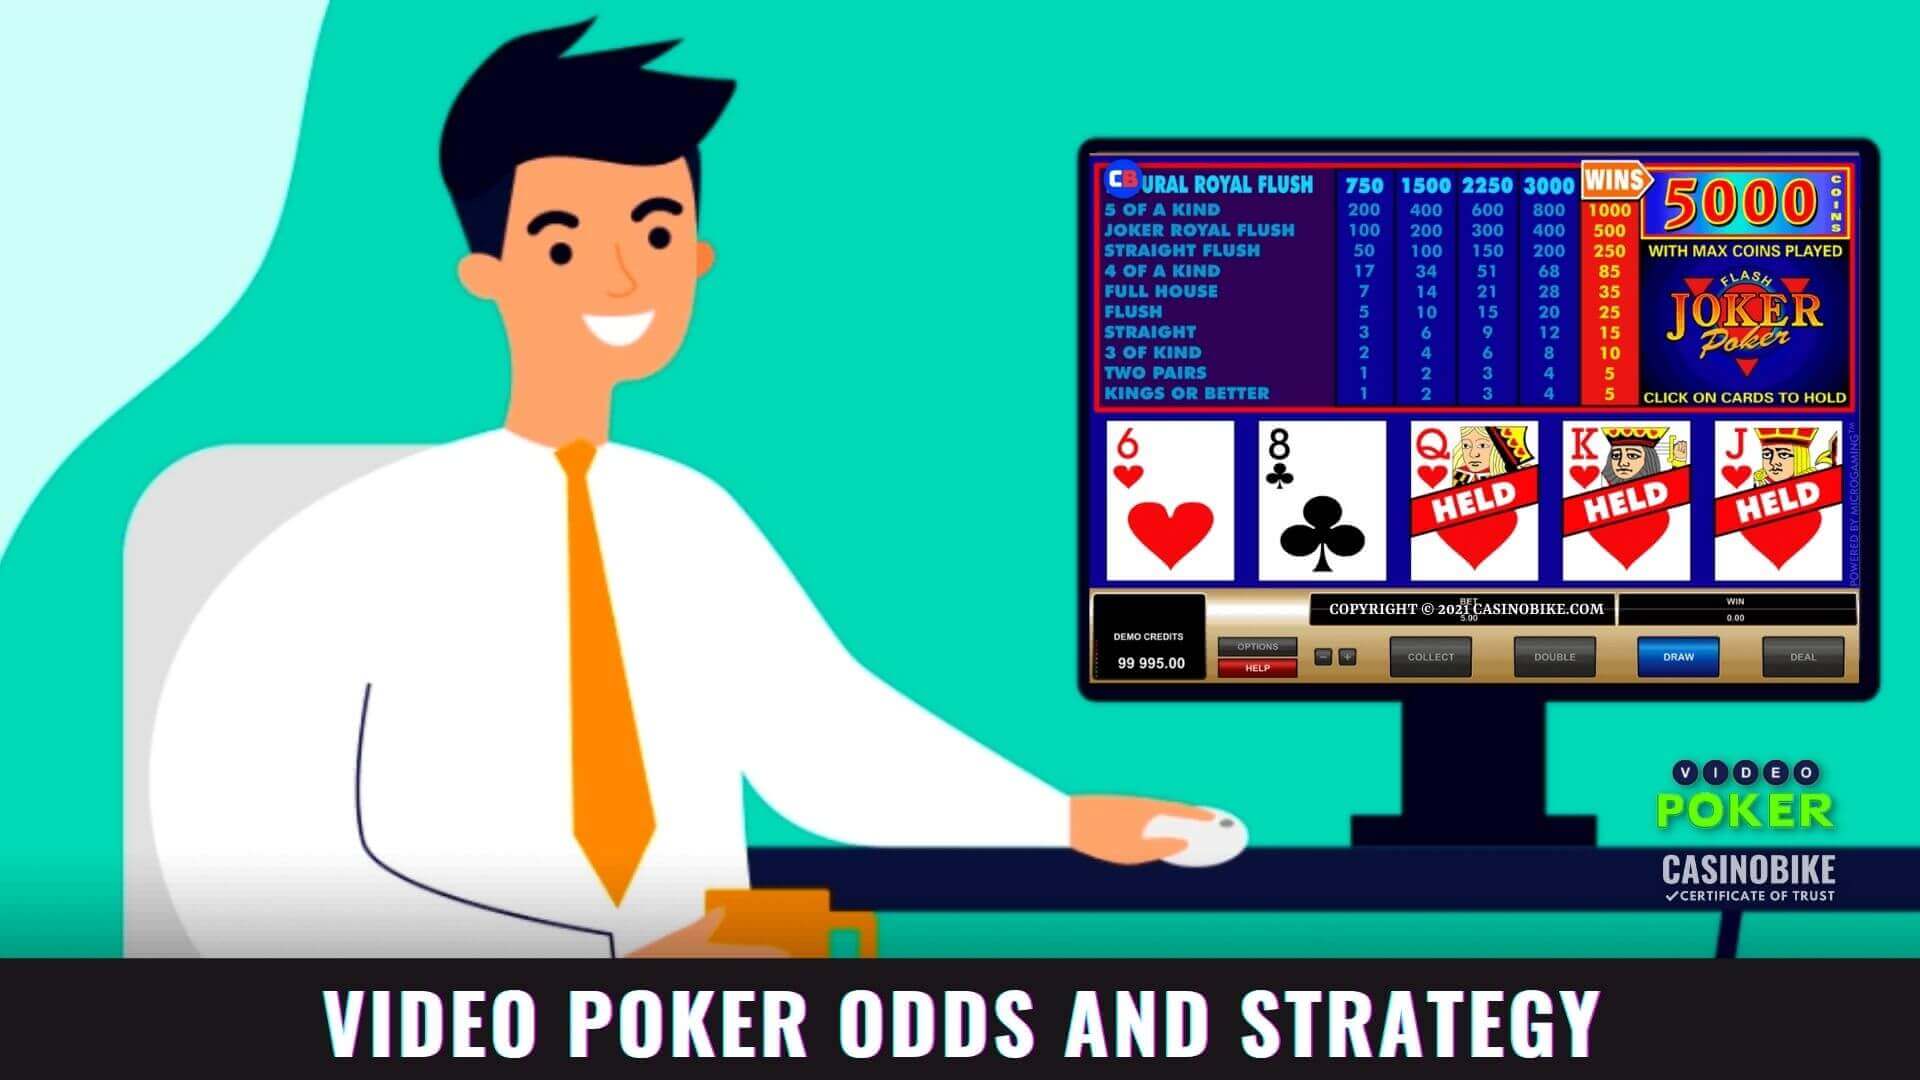 Video poker odds and strategy